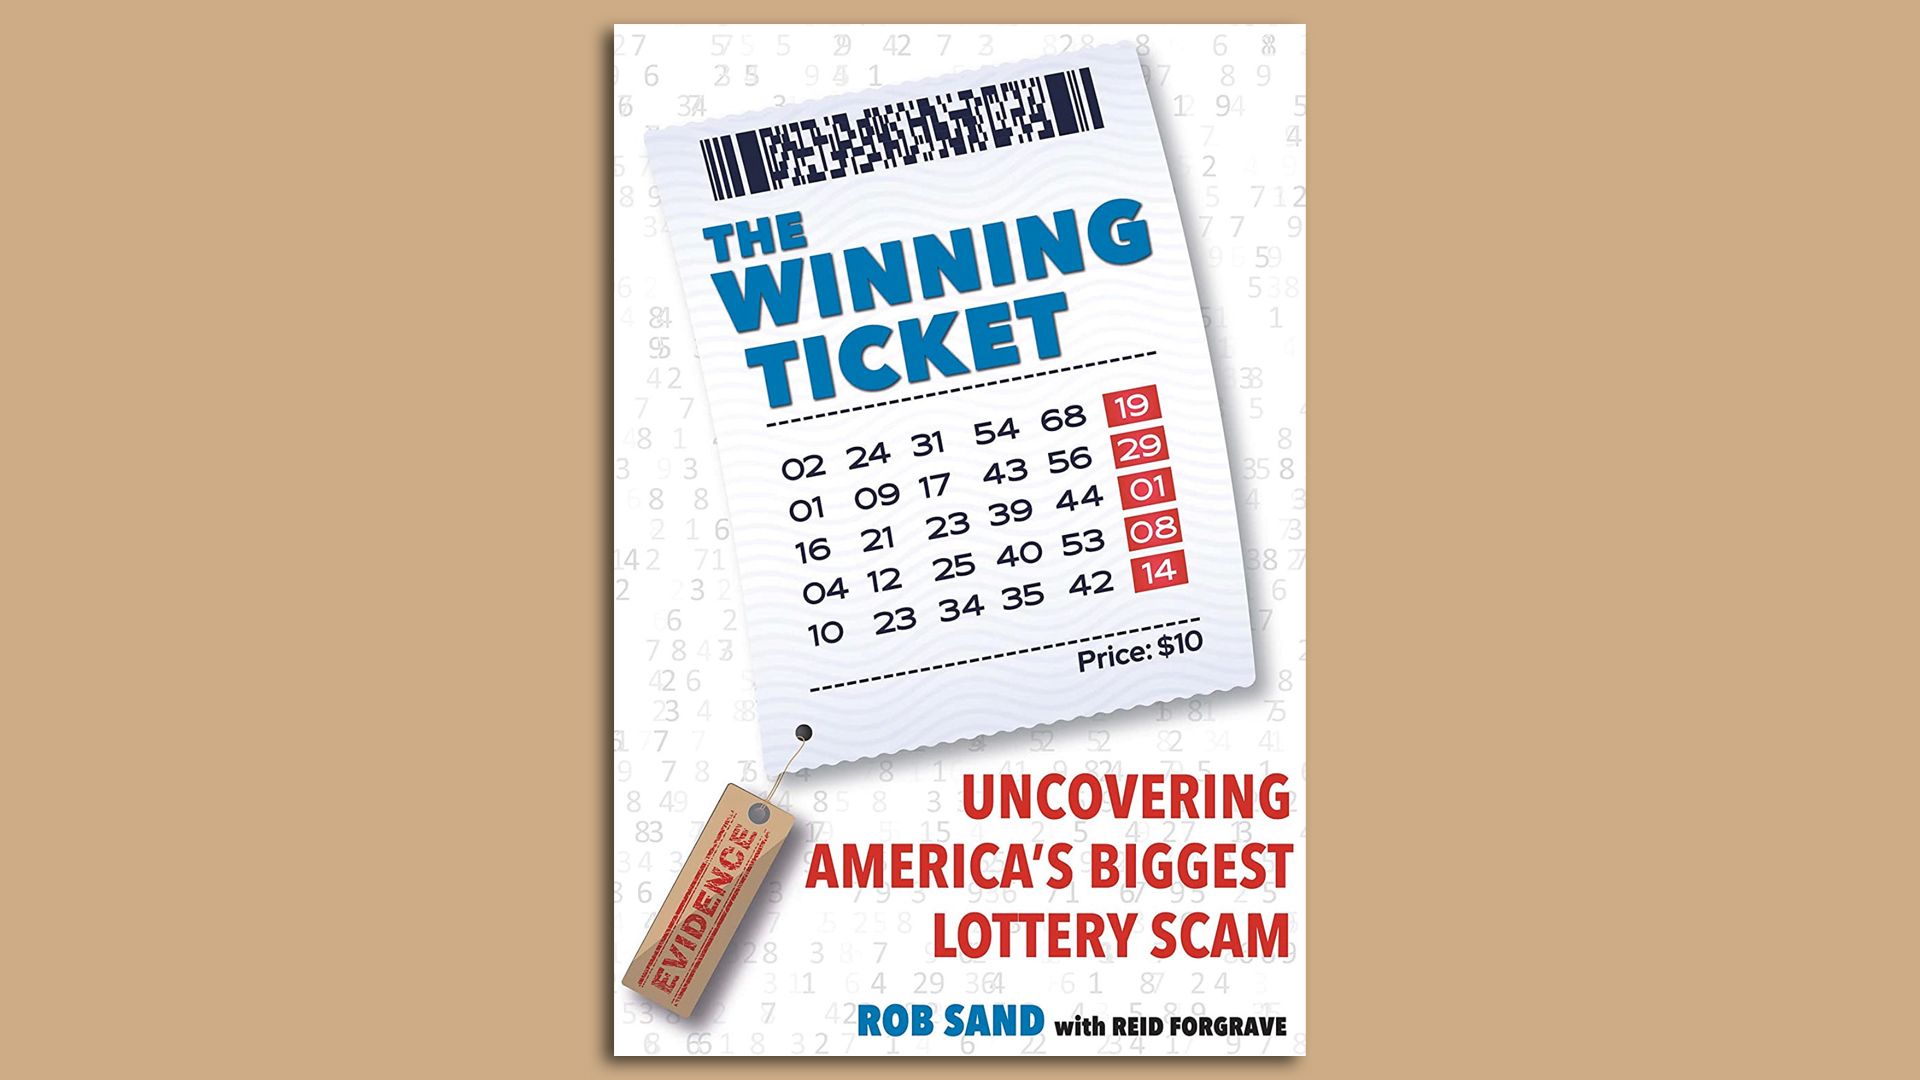 A photo of the cover of "The Winning Ticket"